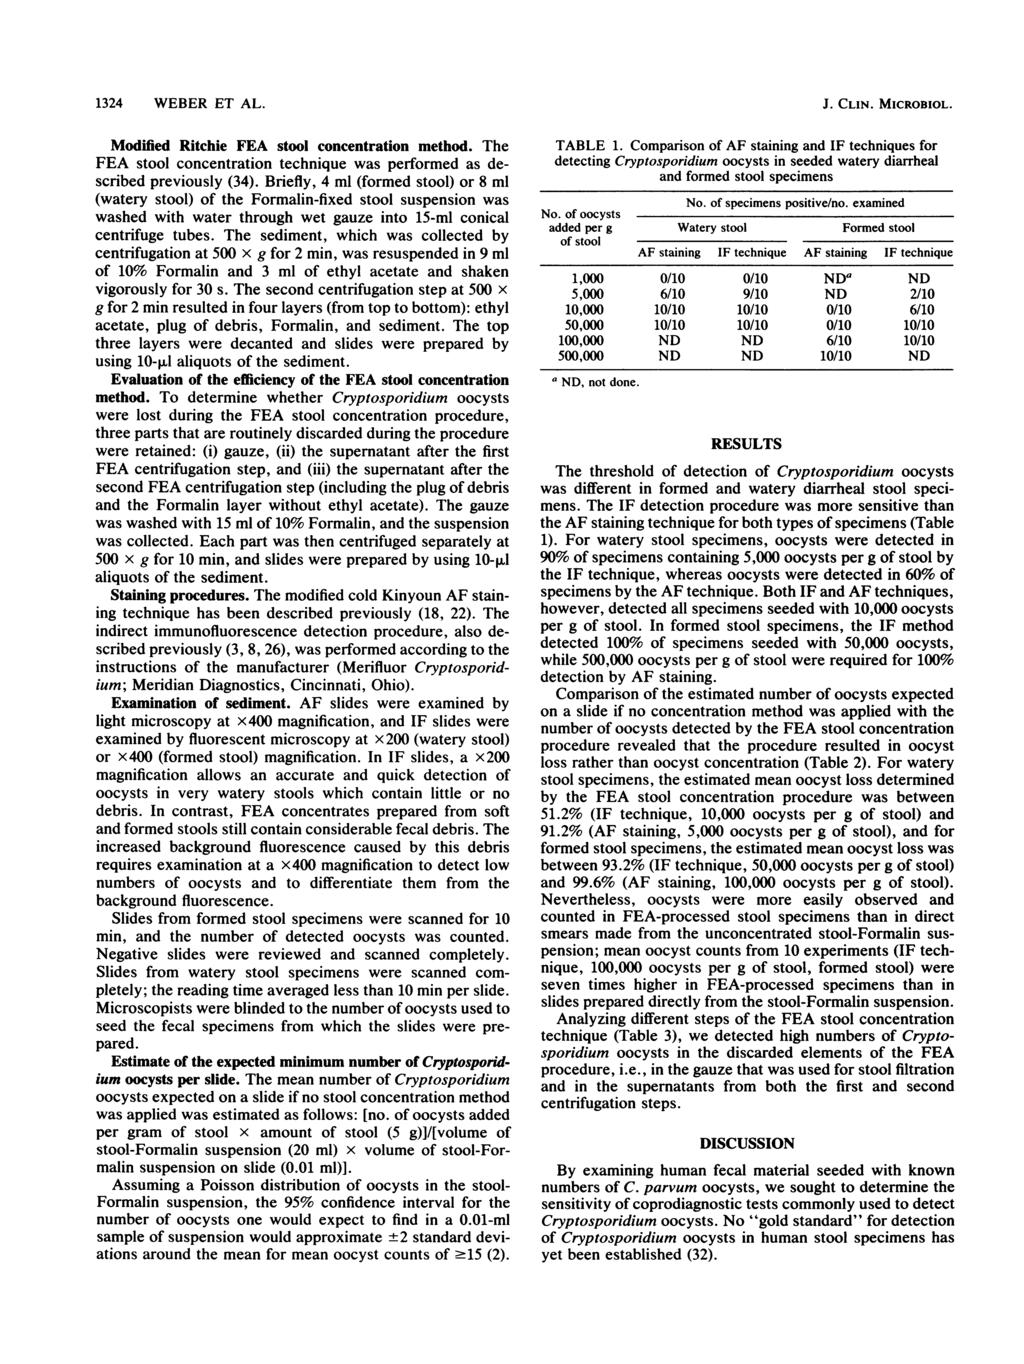 1324 WEBER ET AL. Modffied Ritchie FEA stool concentration method. The FEA stool concentration technique was performed as described previously (34).